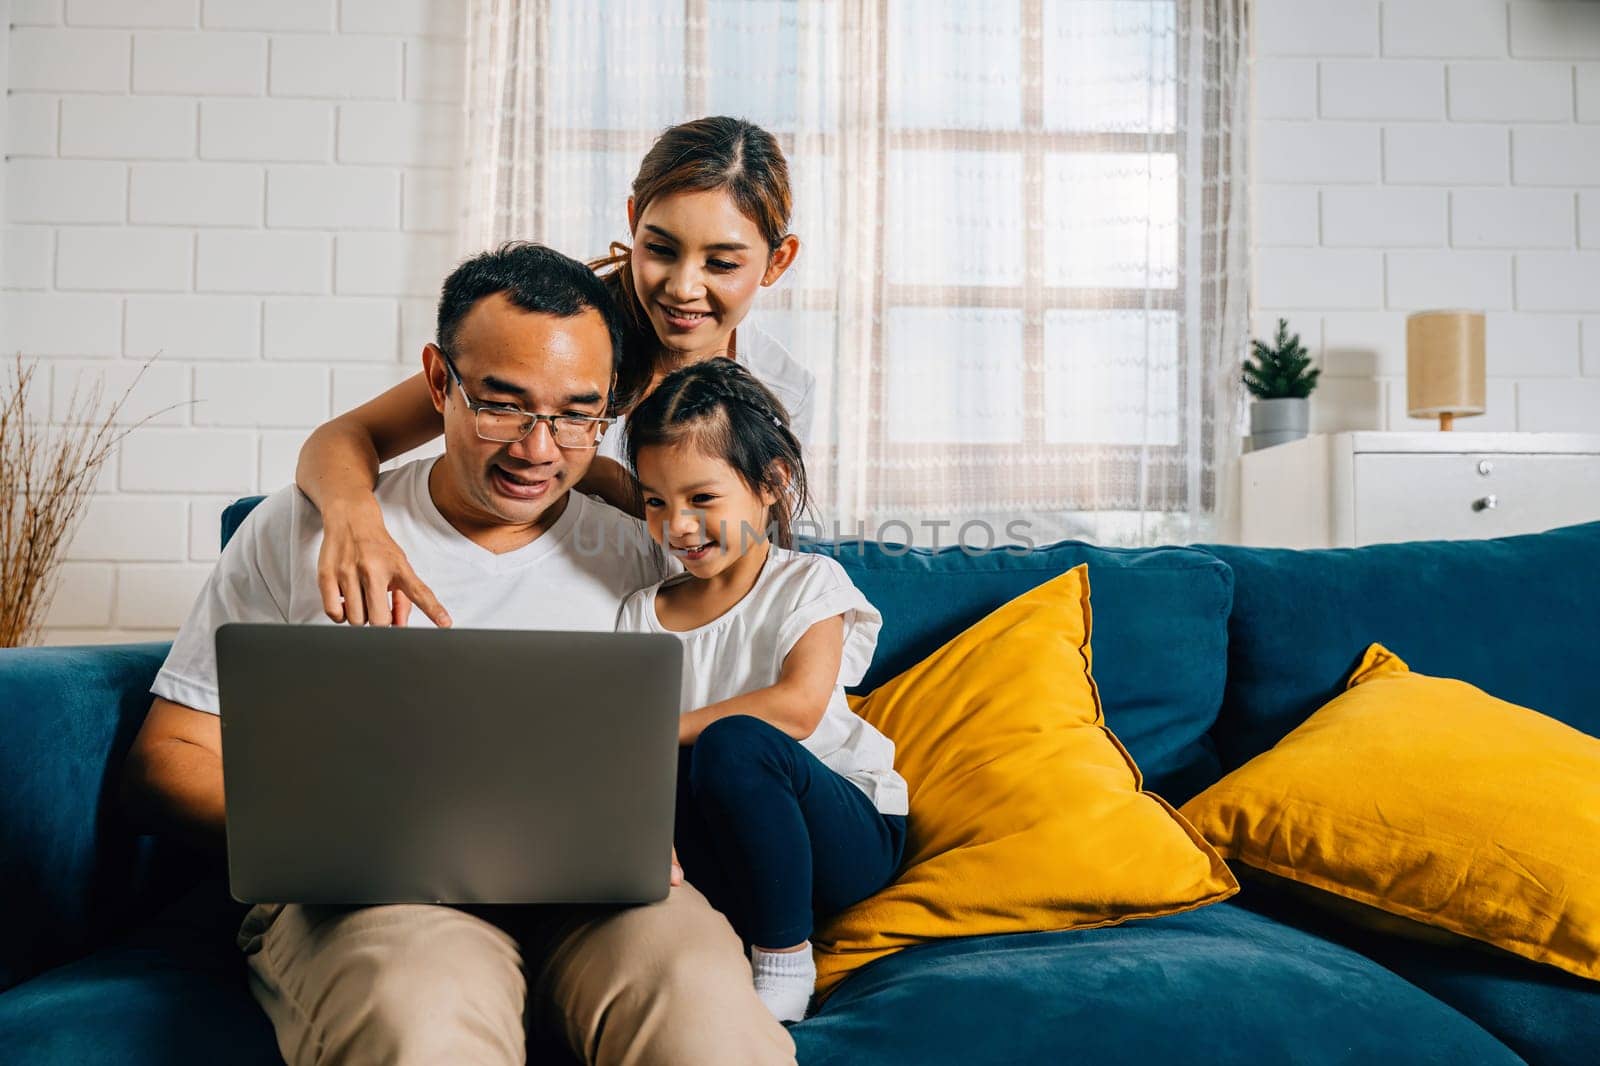 Parents and kids gathered on the couch with a laptop finding happiness in their modern family time by Sorapop